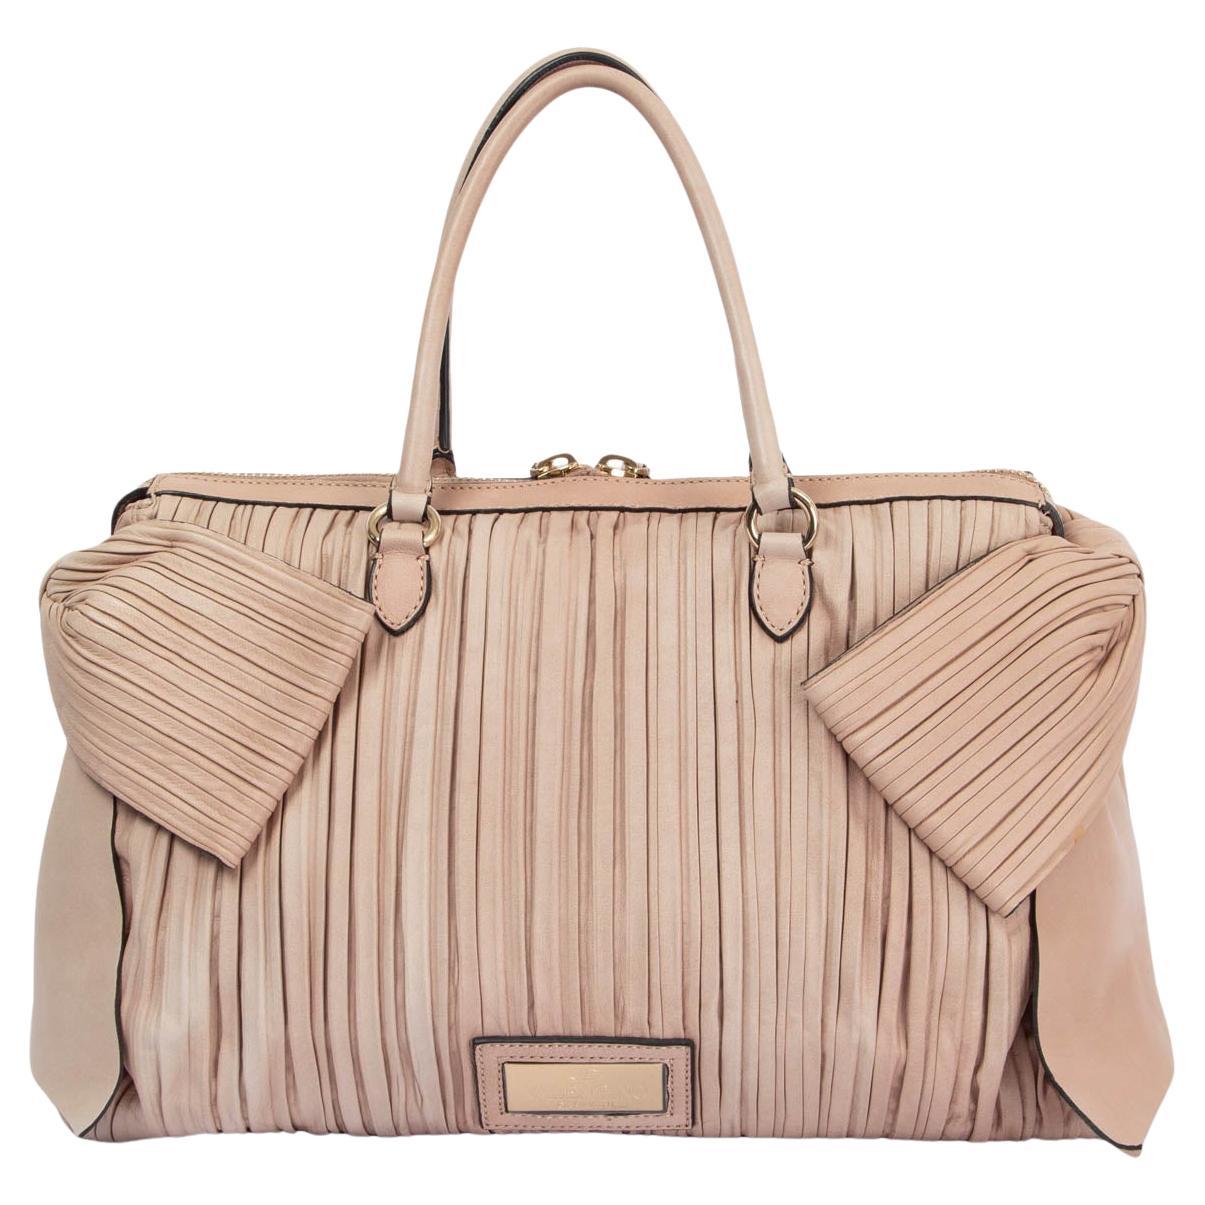 VALENTINO nackte rosa Ledertasche mit BOW EMBELLISHED PLEATED